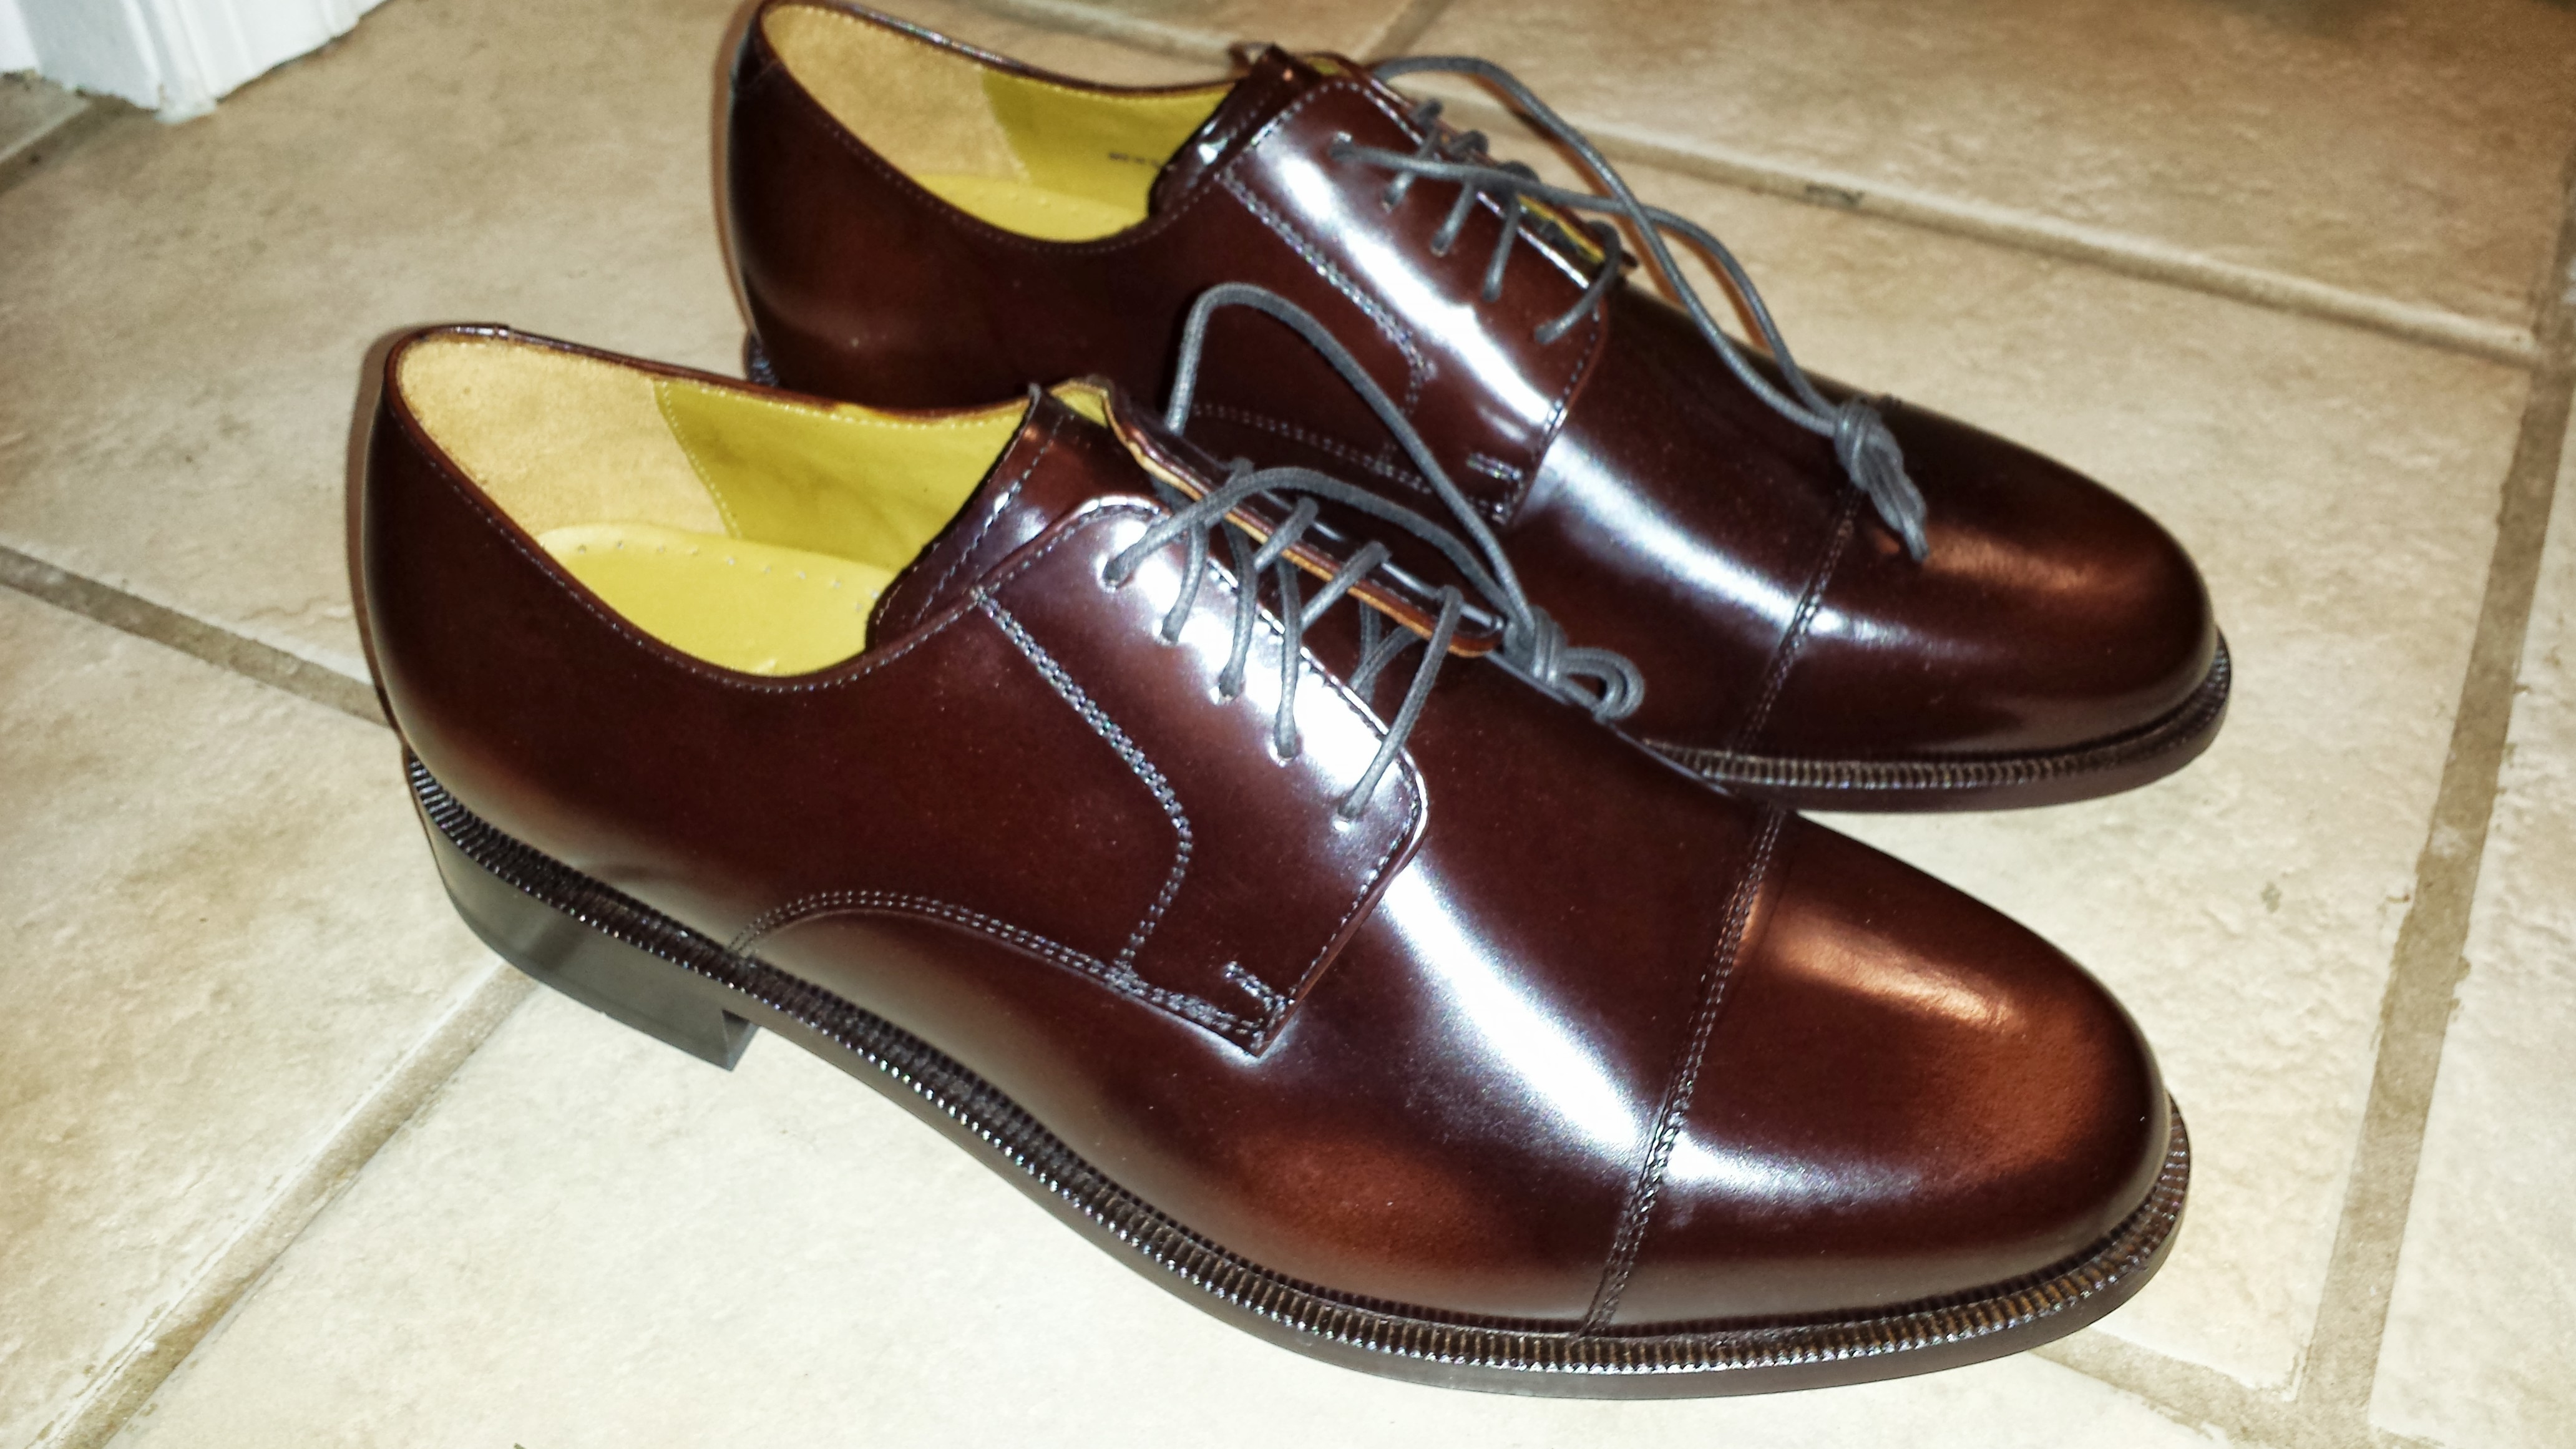 My first pair of really nice shoes | Tales From The Ipe!